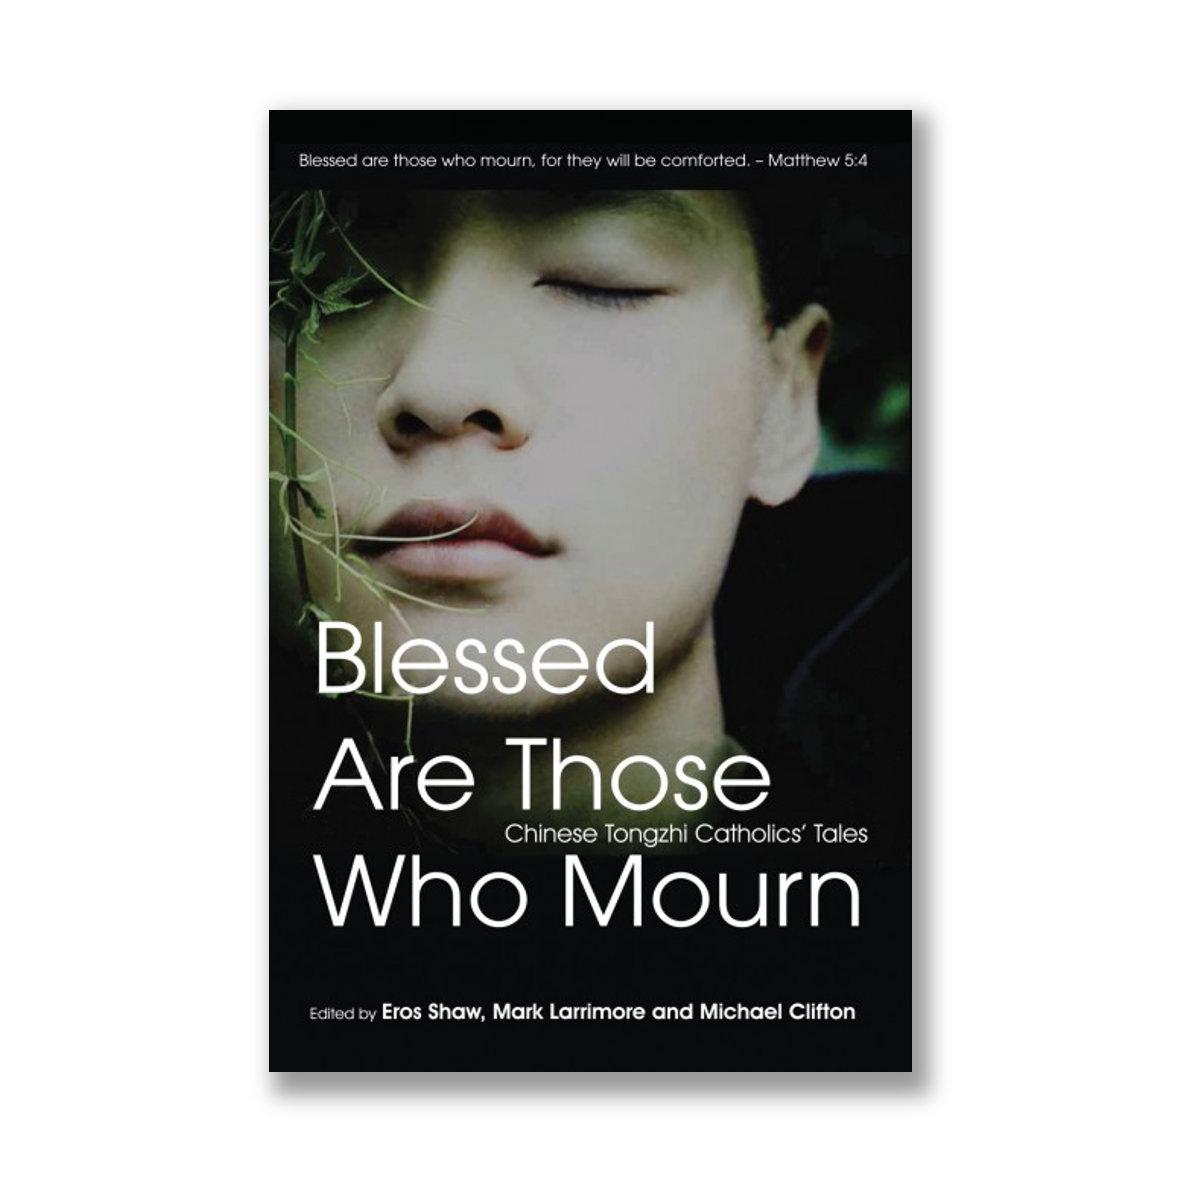 Blessed Are Those Who Mourn: Chinese Tongzhi Catholics' Tales by Eros Shaw, Mark Larrimore, and Michael Clifton